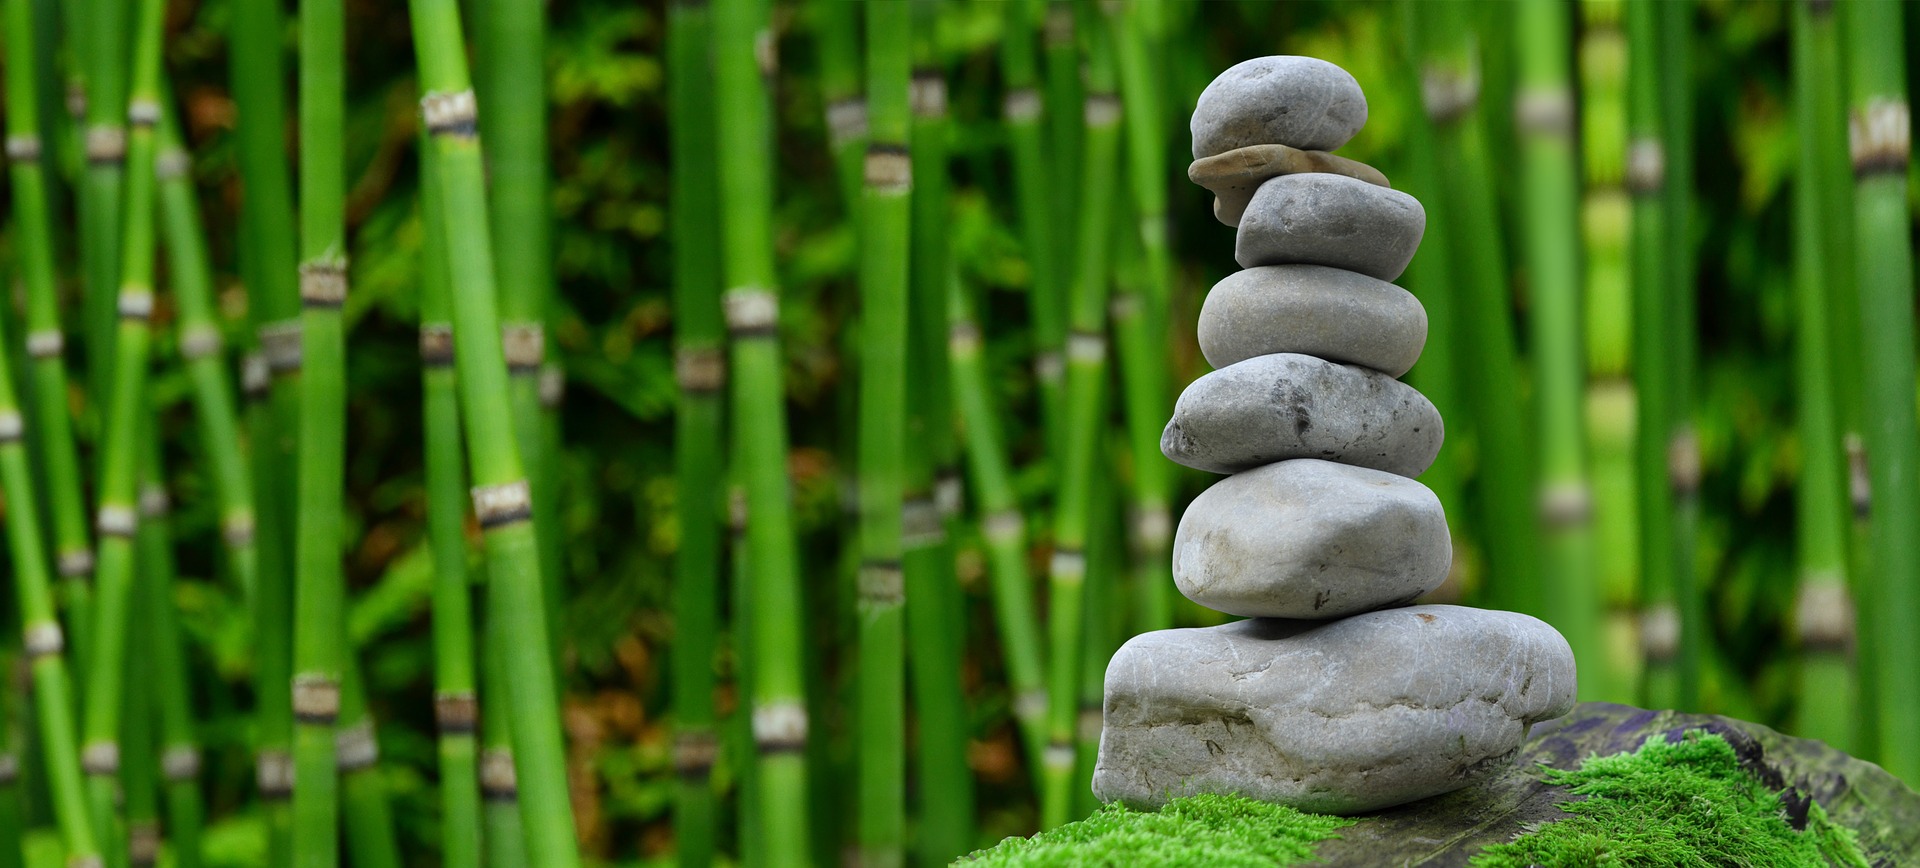 zen stone meditation bamboo forest wellness being well thrive personally